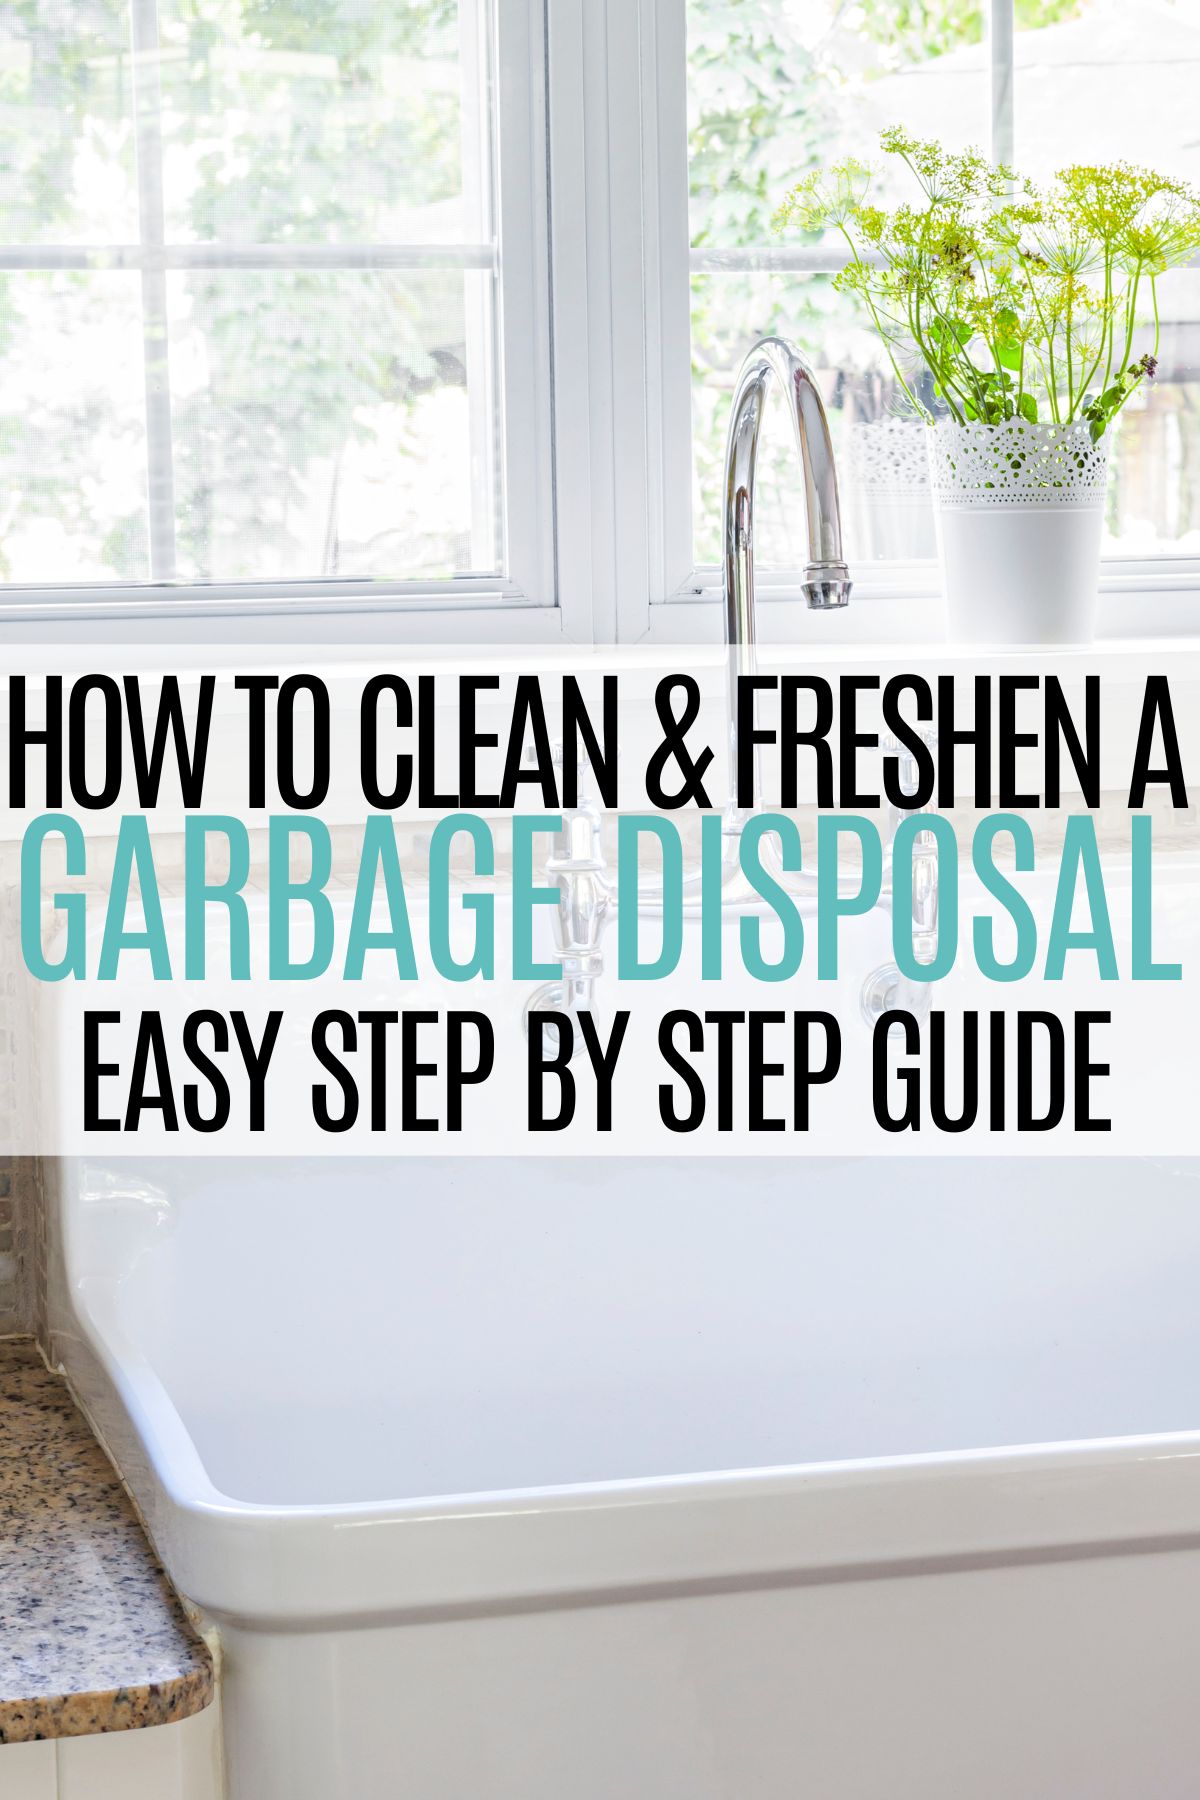 white kitchen sink under a window with text how to clean and freshen a garbage disposal, easy step by step guide.